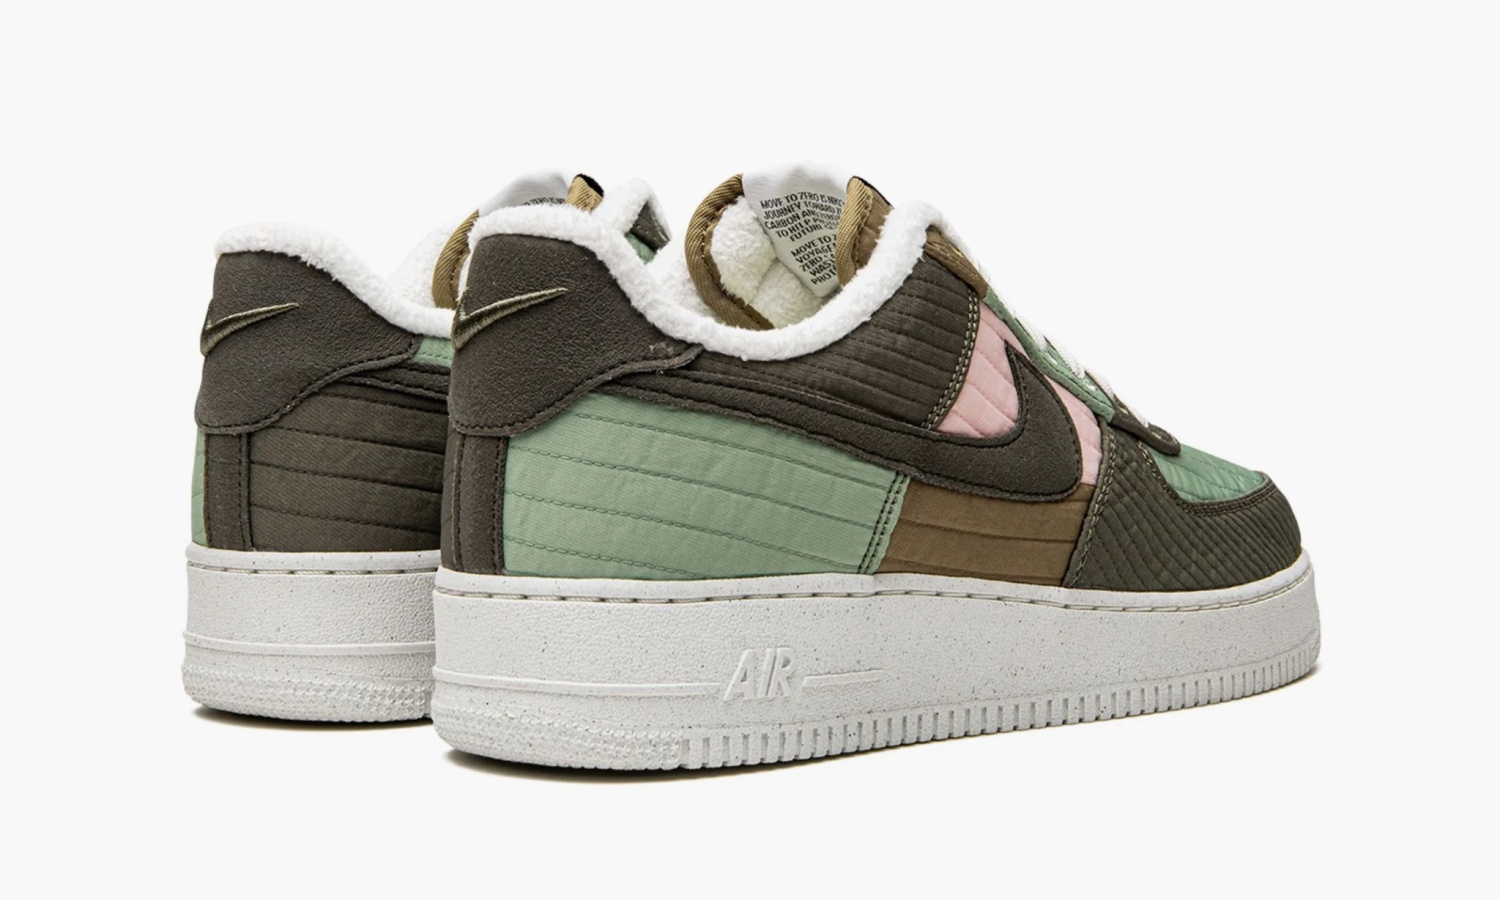 фото Nike Air Force 1 Low 07 LX "Toasty Oil Green" (Nike Air Force 1)-DC8744 300